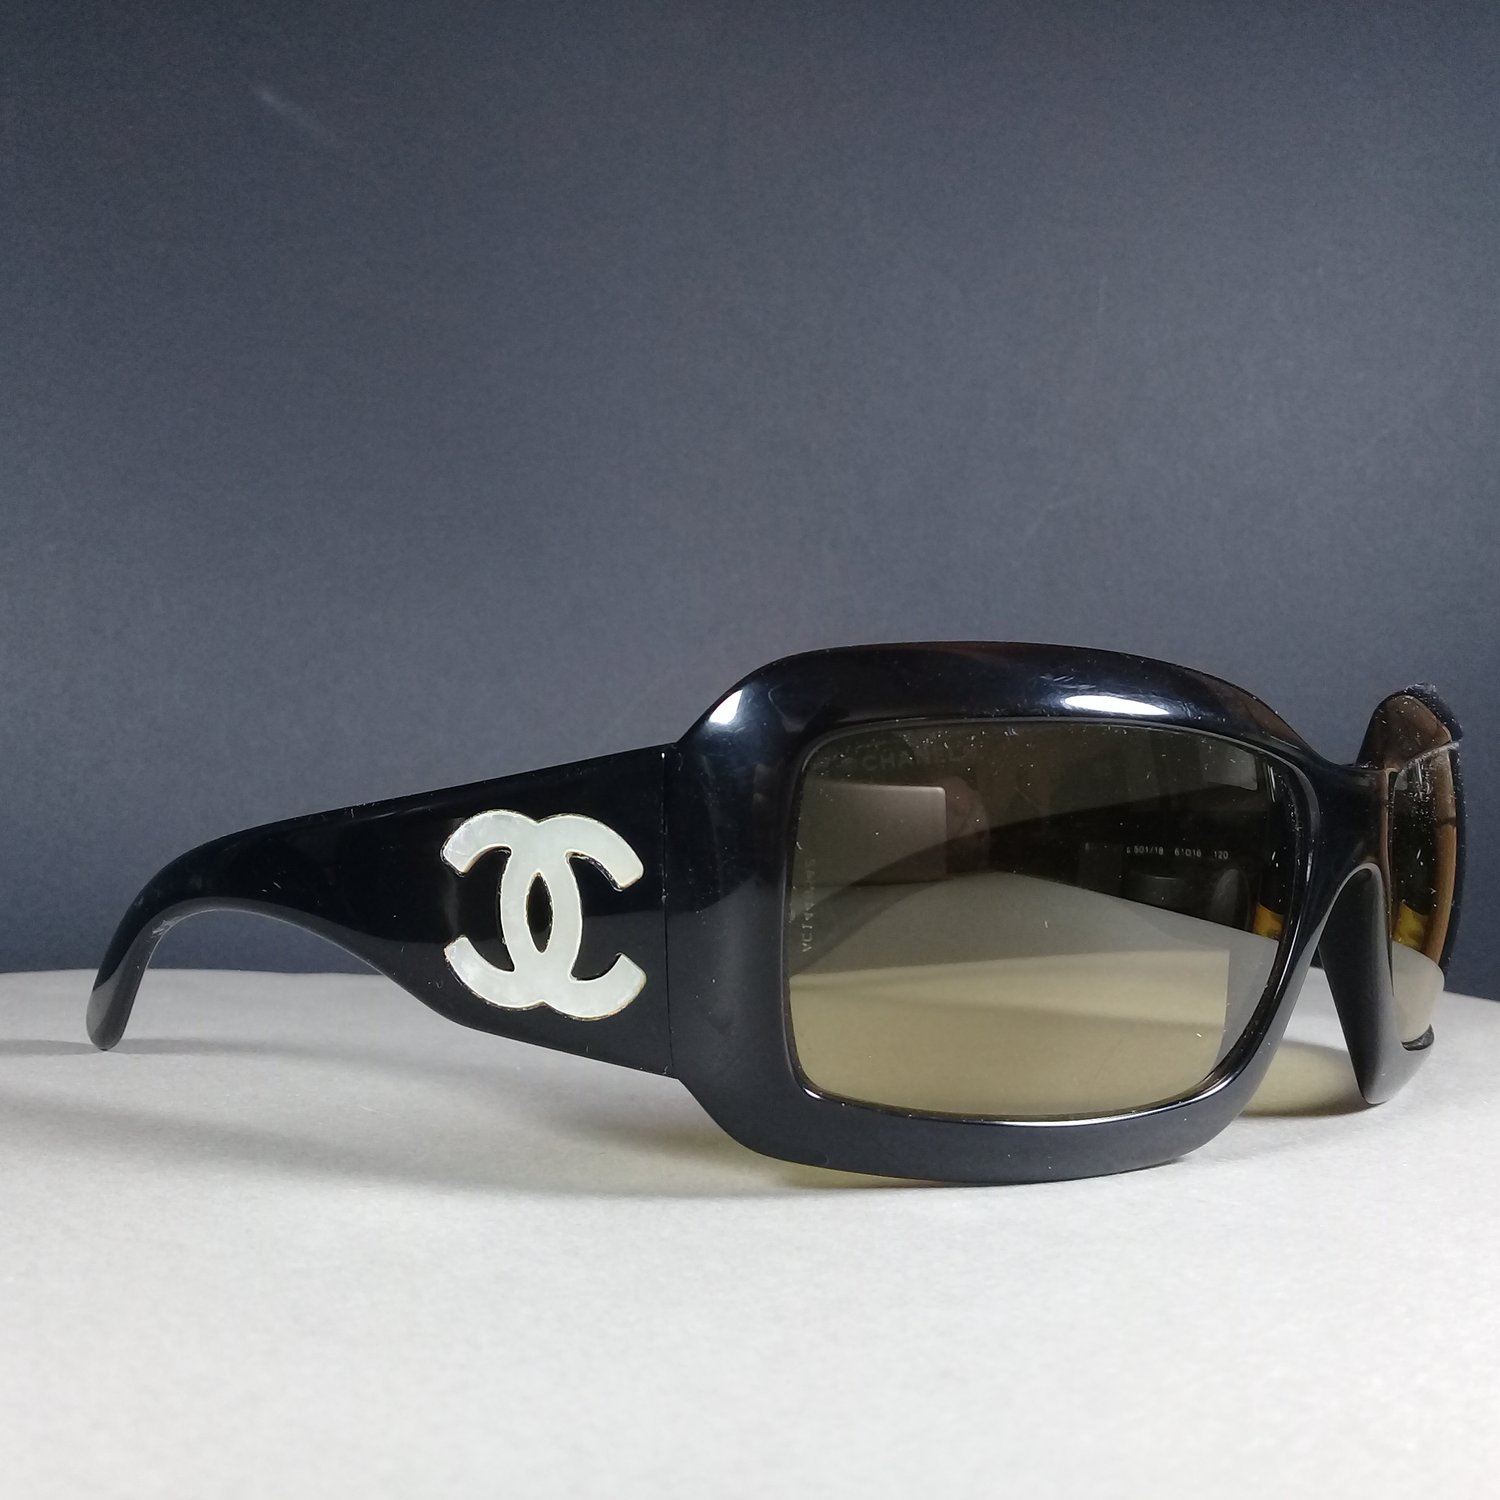 Chanel 5076-H 501/11 120 Black/Yellow Mother of Pearl CC Logos Sunglasses –